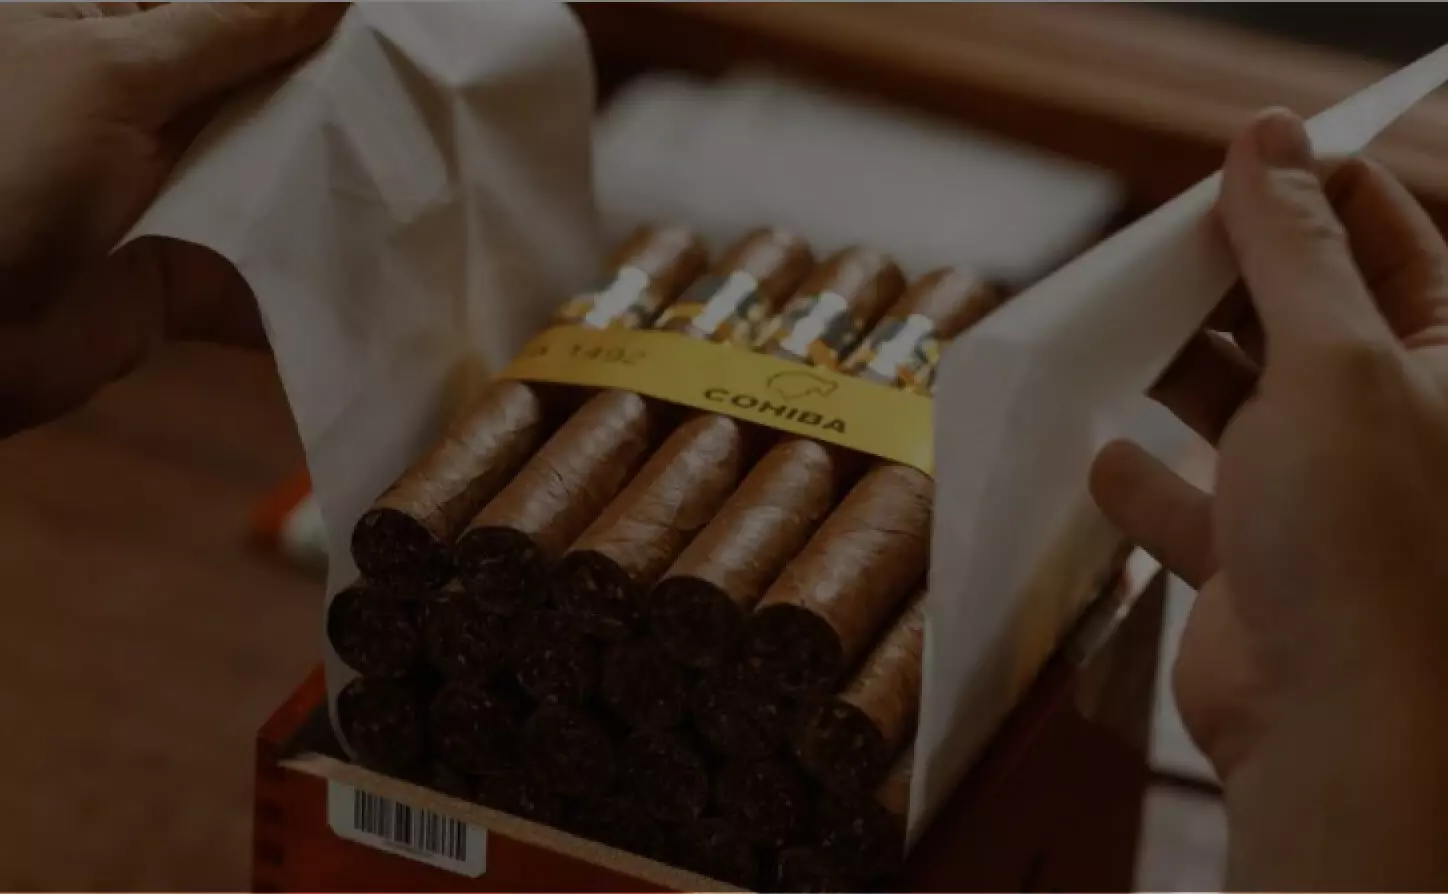 A pack of more than 12 Cohiba cigars